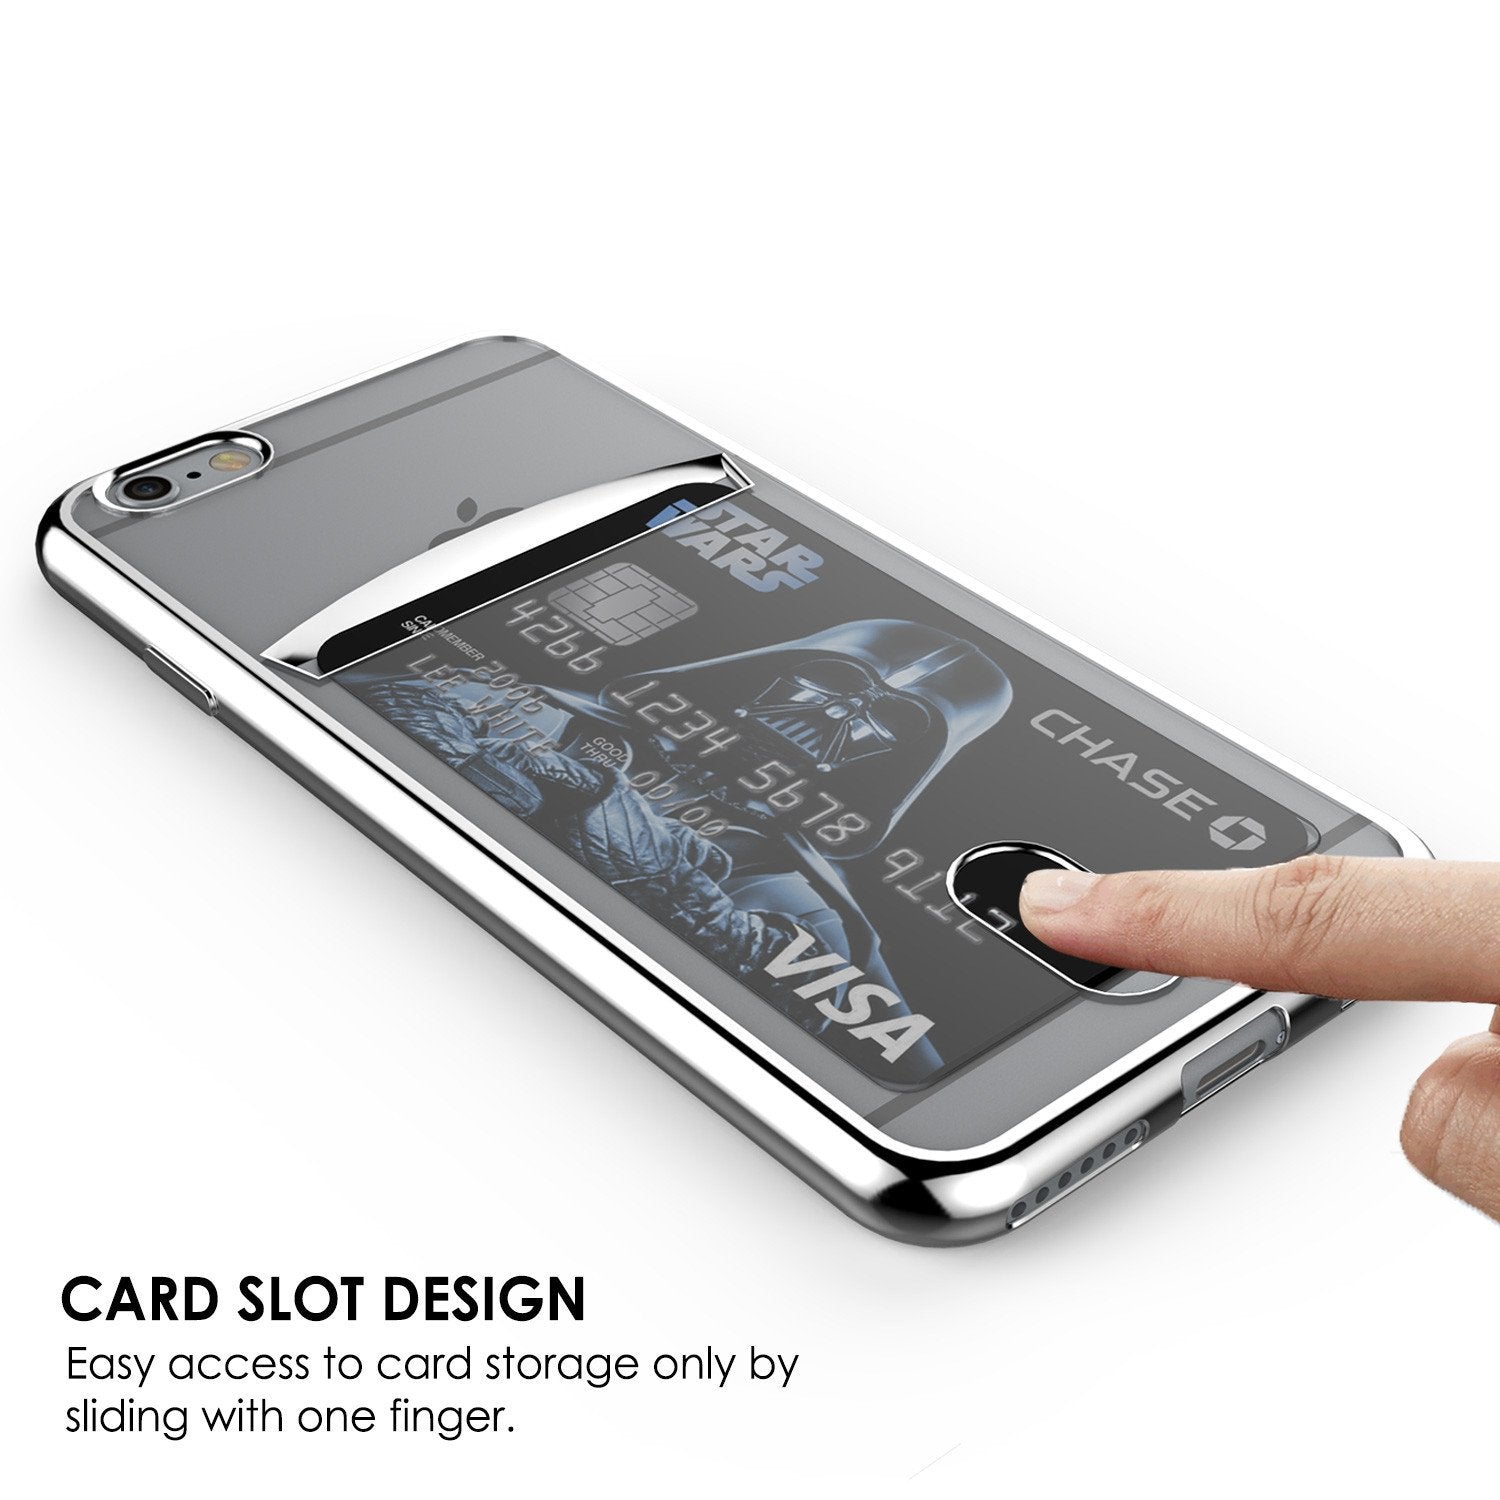 iPhone 6s+ Plus/6+ Plus Case, PUNKCASE® LUCID Silver Series | Card Slot | SHIELD Screen Protector